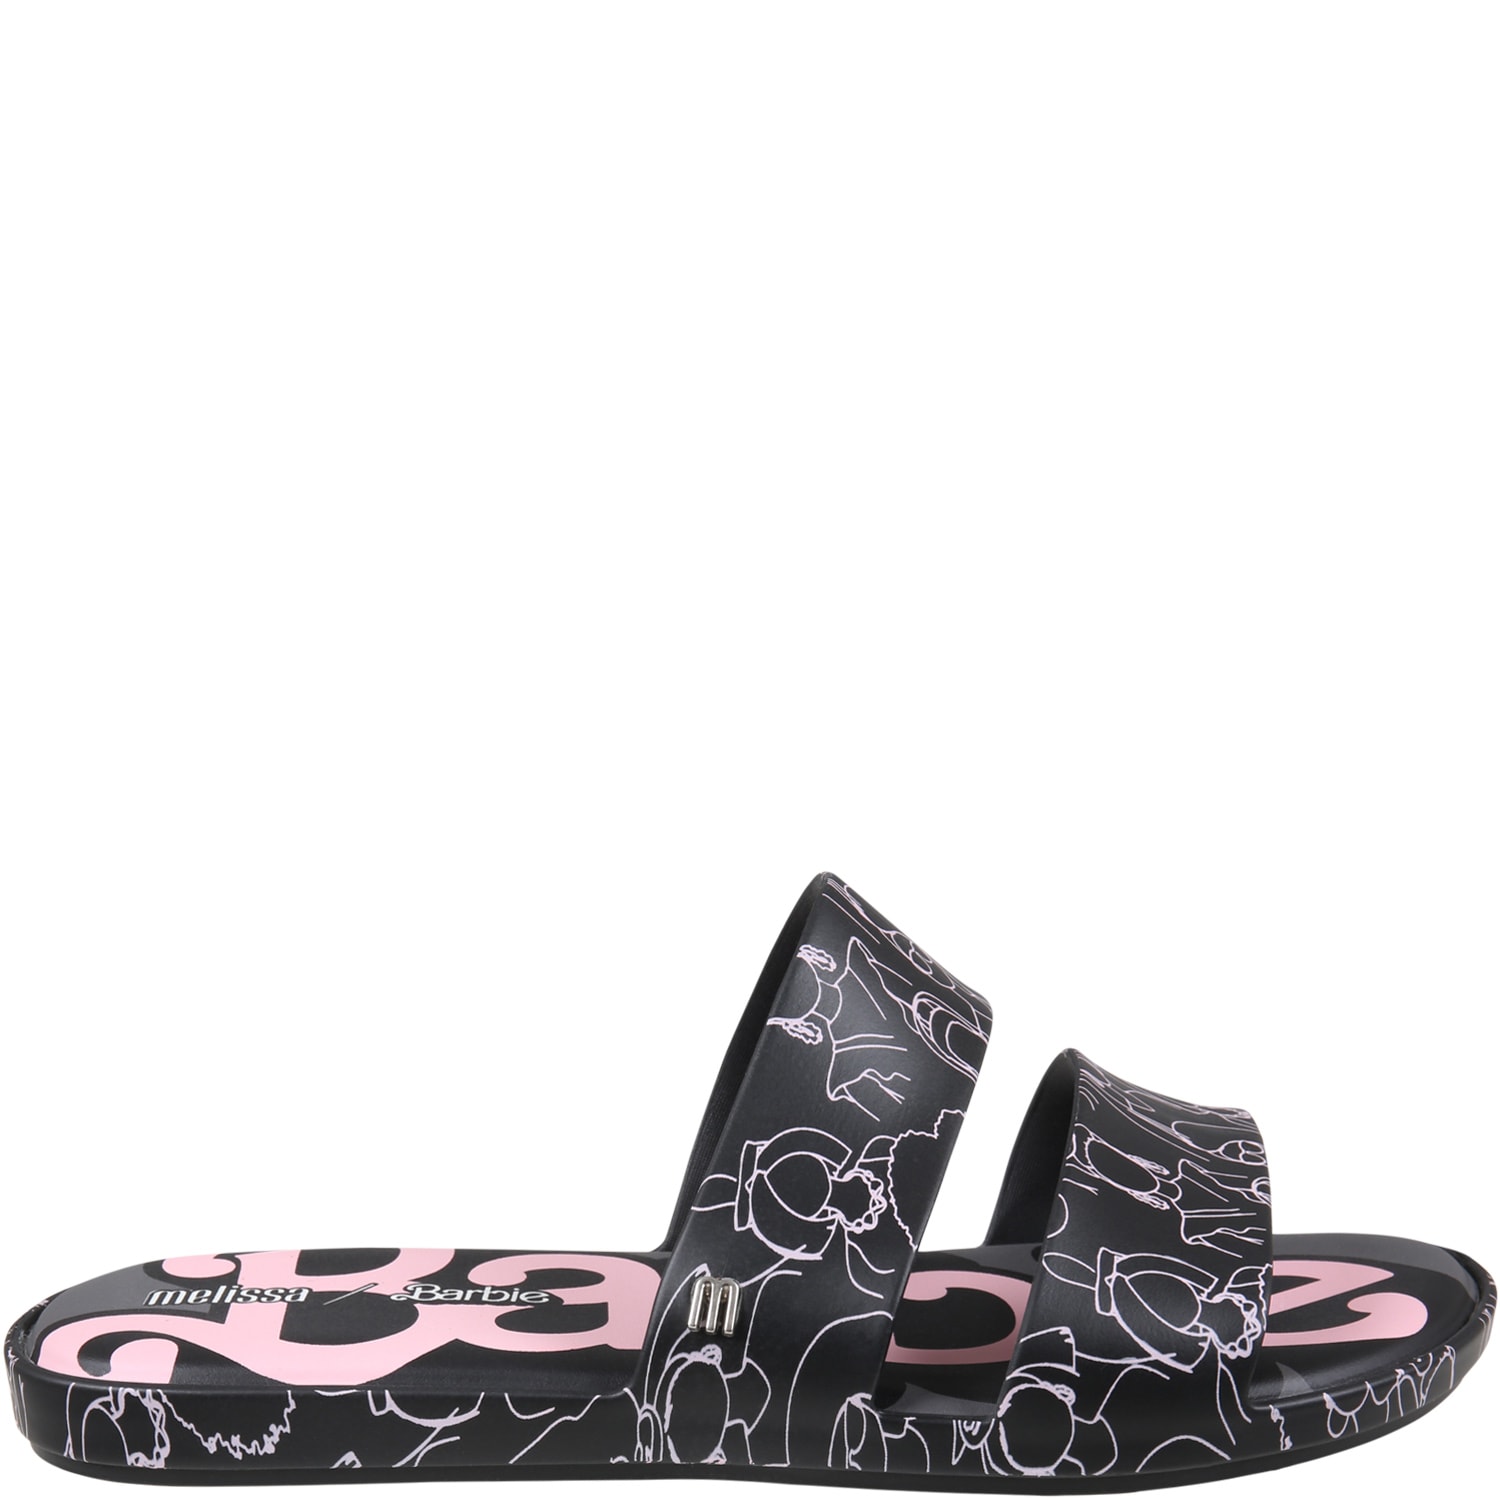 Melissa Black Sandals For Girl With Barbie